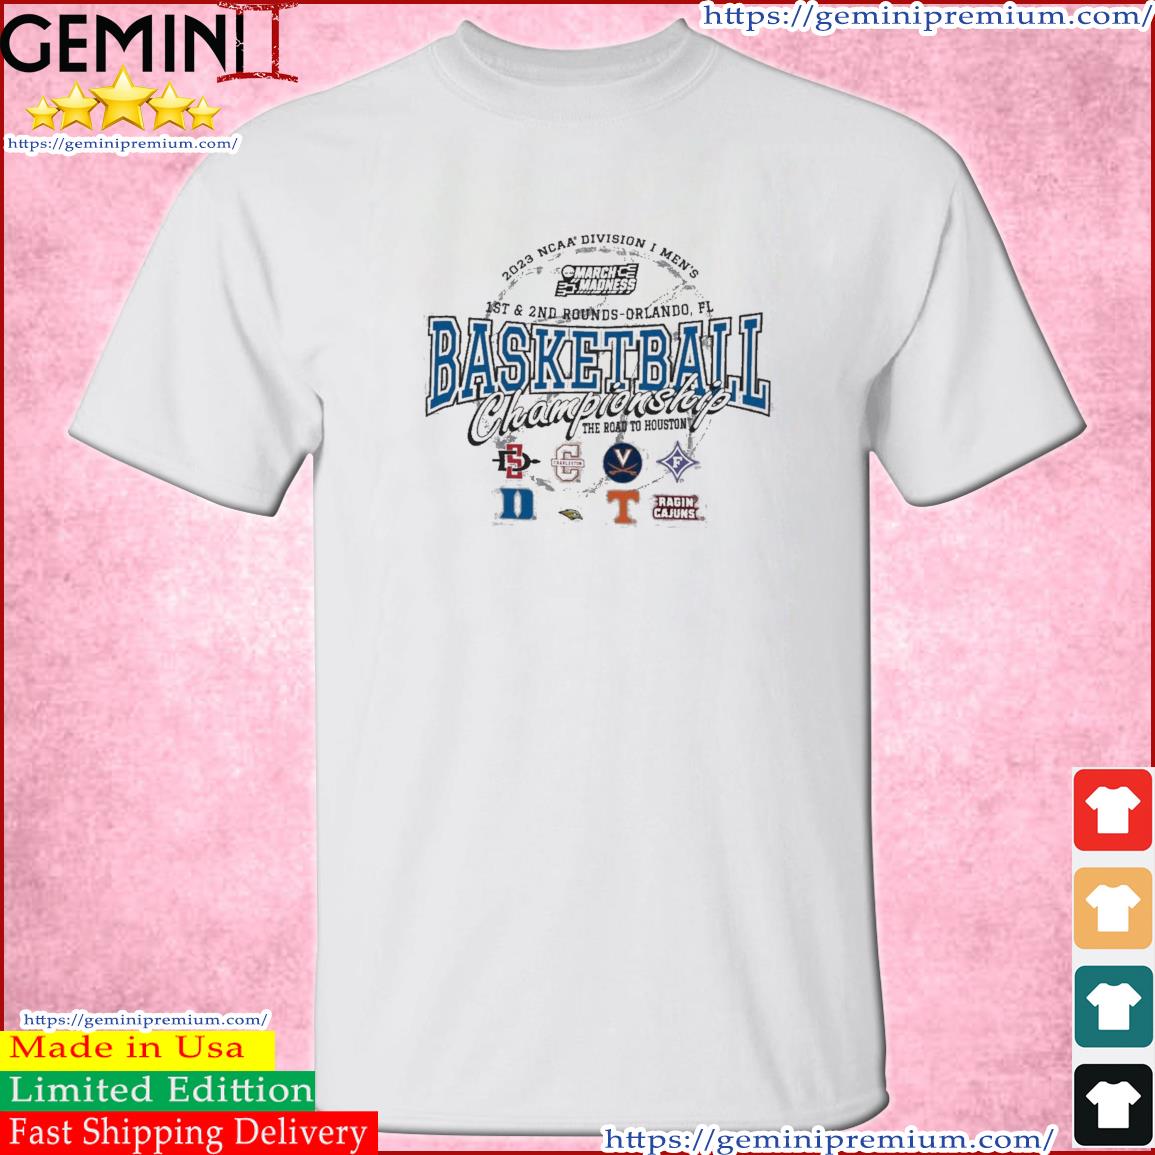 2023 NCAA Division I Men's Basketball 1st & 2nd Rounds Orlando The Road To Houston Shirt